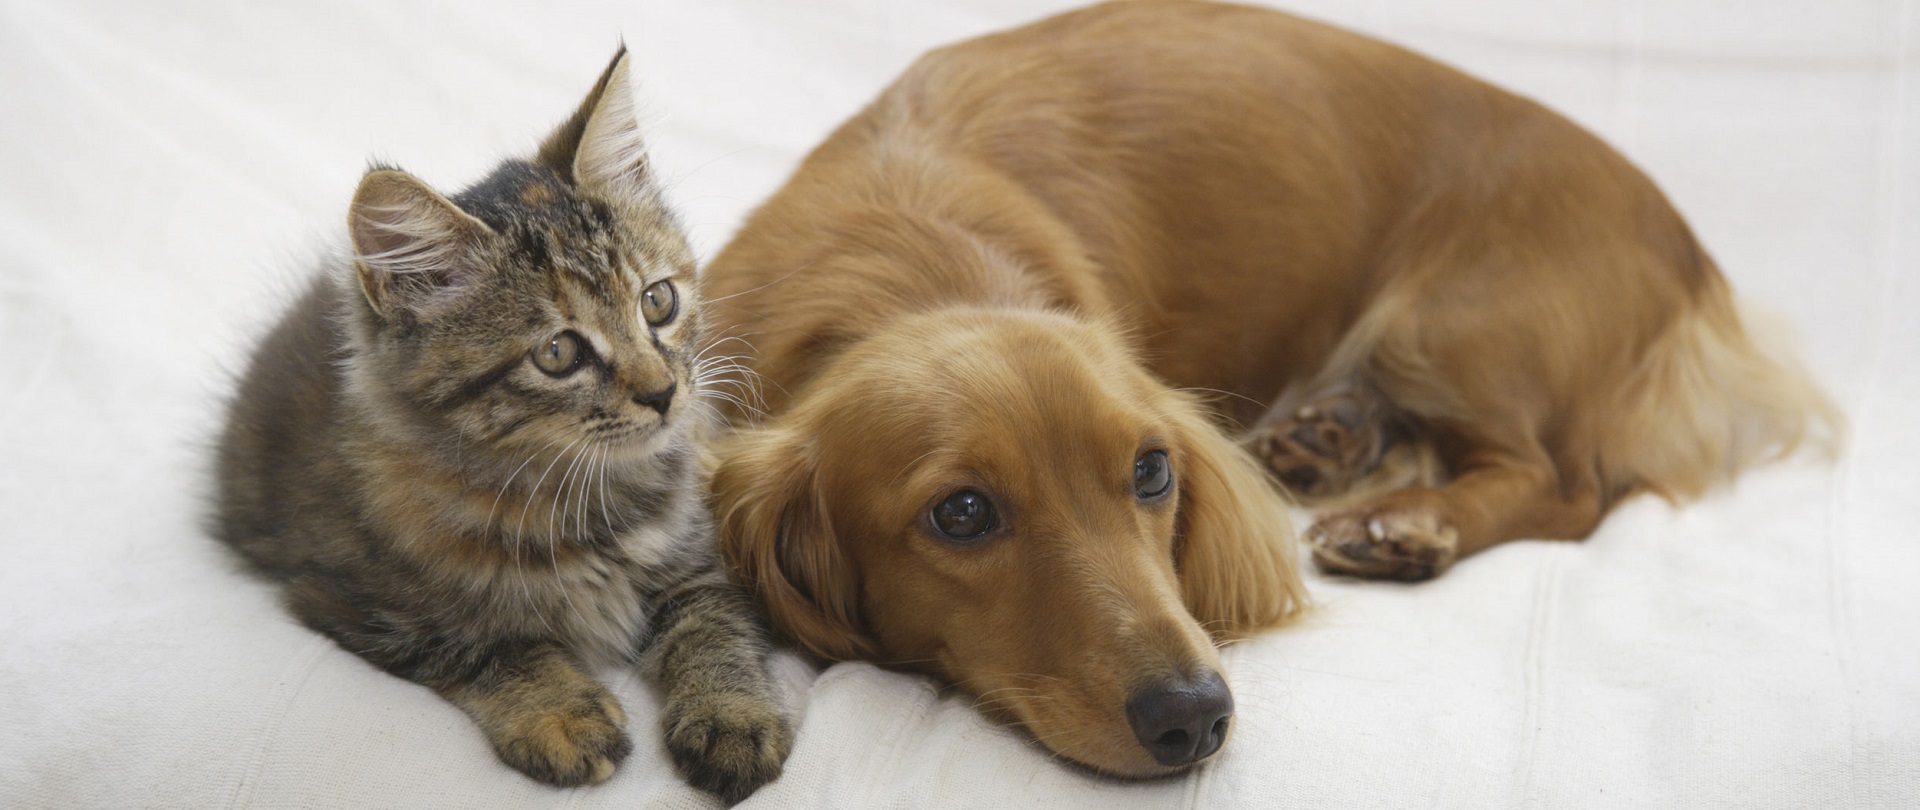 How To Get Rid Of Fleas? Call The Pest Control Experts ...